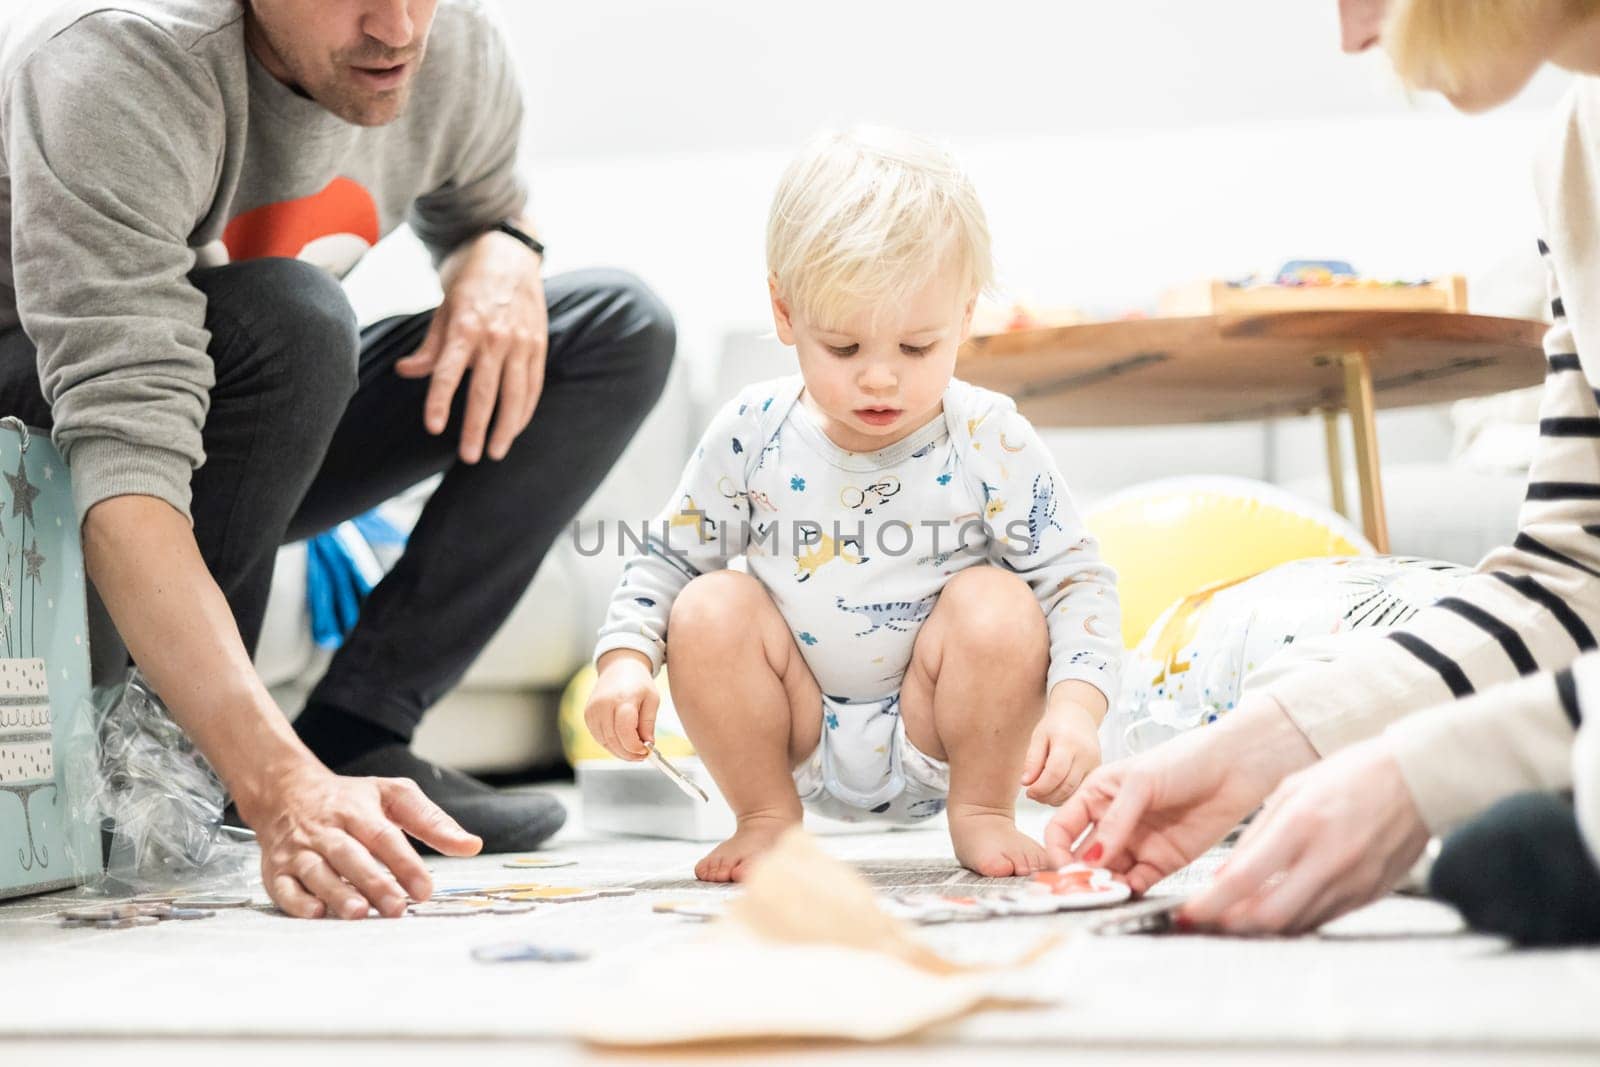 Parents playing games with child. Little toddler doing puzzle. Infant baby boy learns to solve problems and develops cognitive skills. Child development concept by kasto